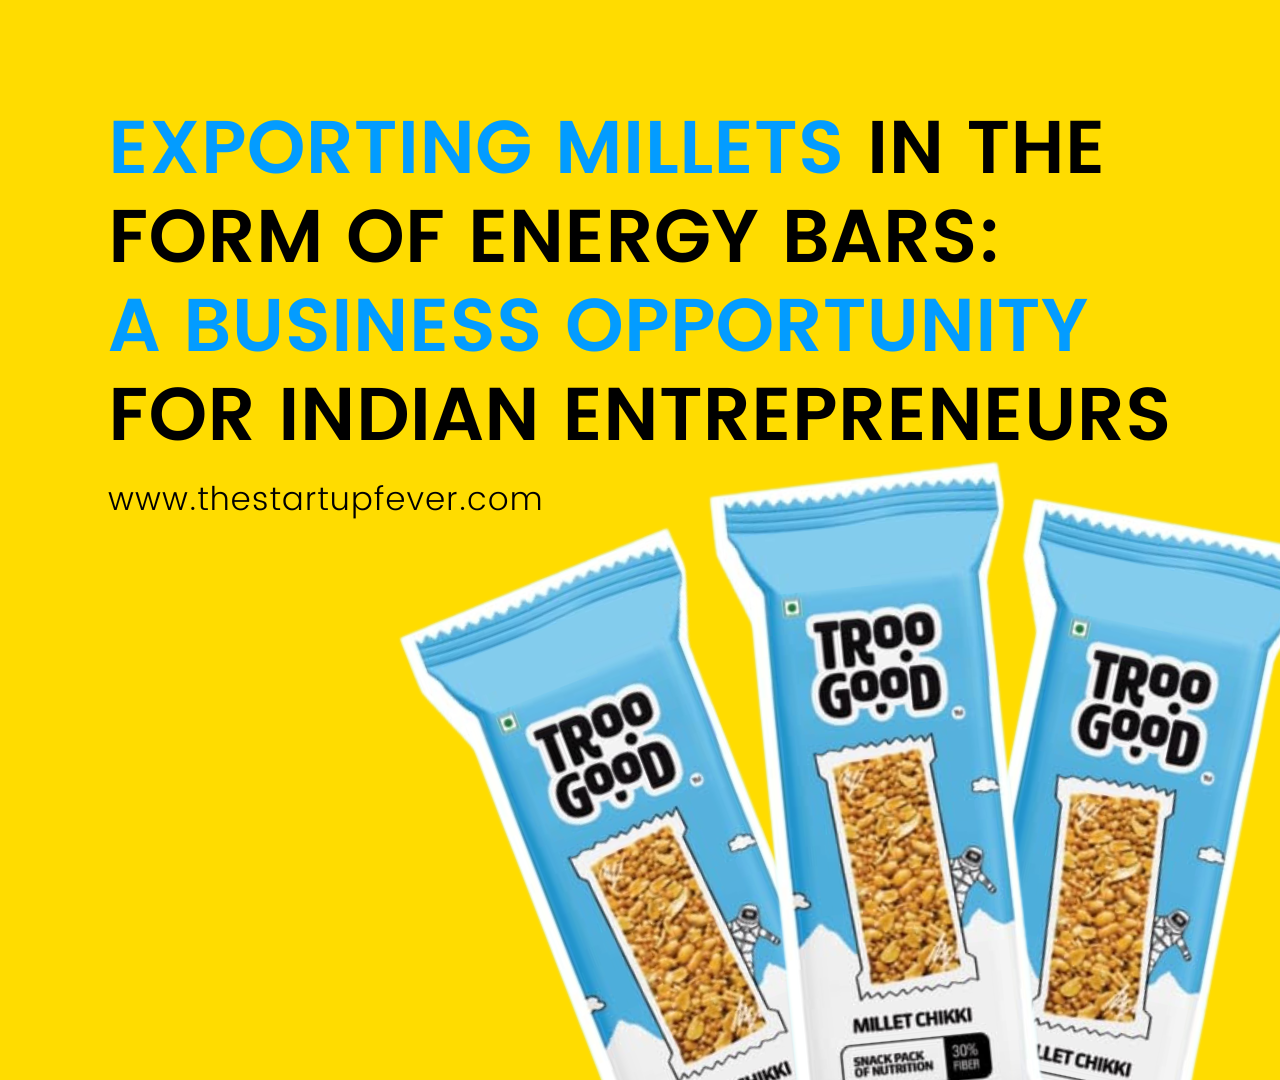 Exporting Millets in the Form of Energy Bars: A Business Opportunity for Indian Entrepreneurs